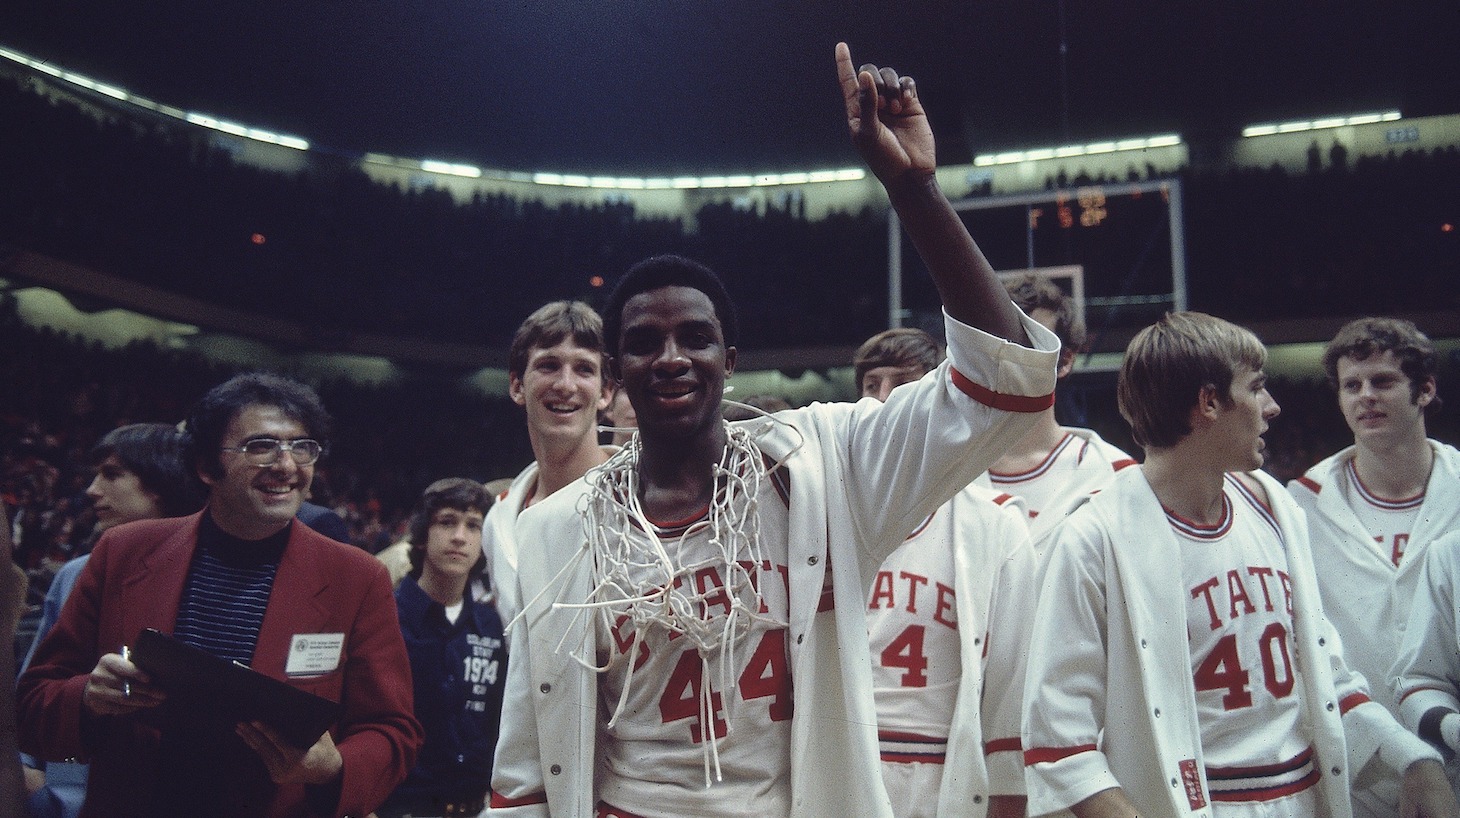 College Basketball: NCAA Final Four, North Carolina State David Thompson (44) victorious with net after winning game vs UCLA, Greensboro, NC 3/24/1974